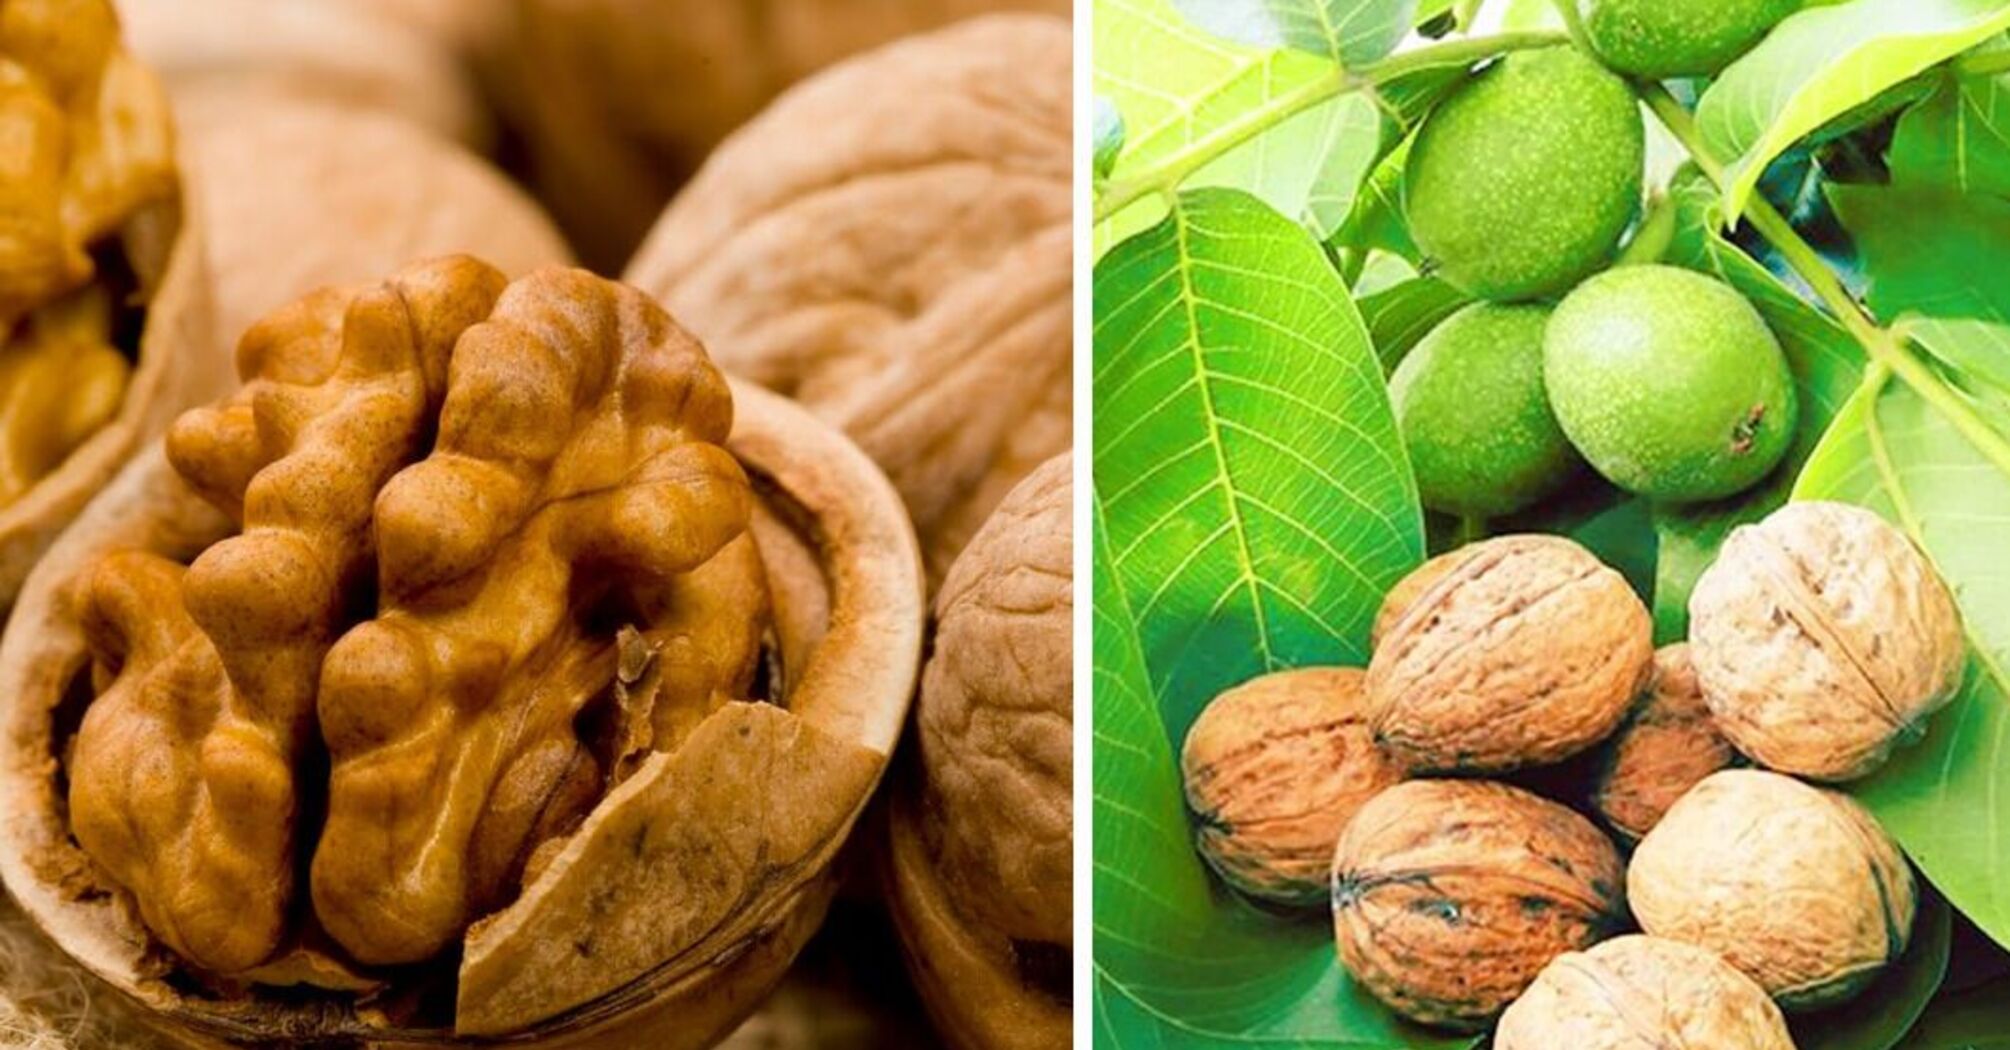 In what form are the healthiest walnuts